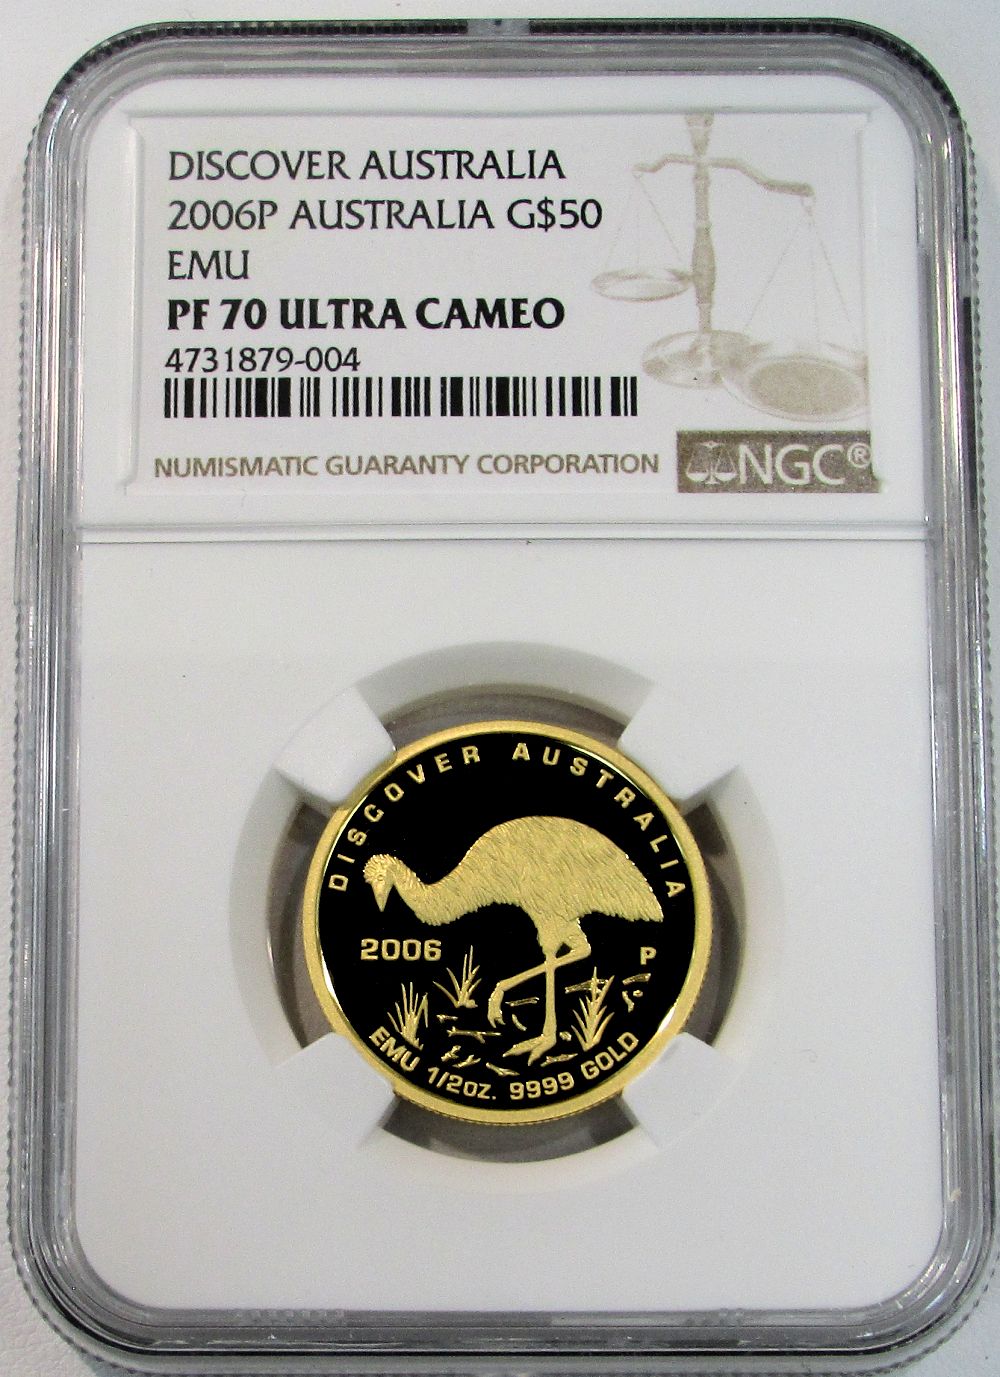 2006 P GOLD AUSTRALIA $50 COIN NGC PROOF 70 ULTRA CAMEO DISCOVERY SERIES EMU ONLY 446 MINTED